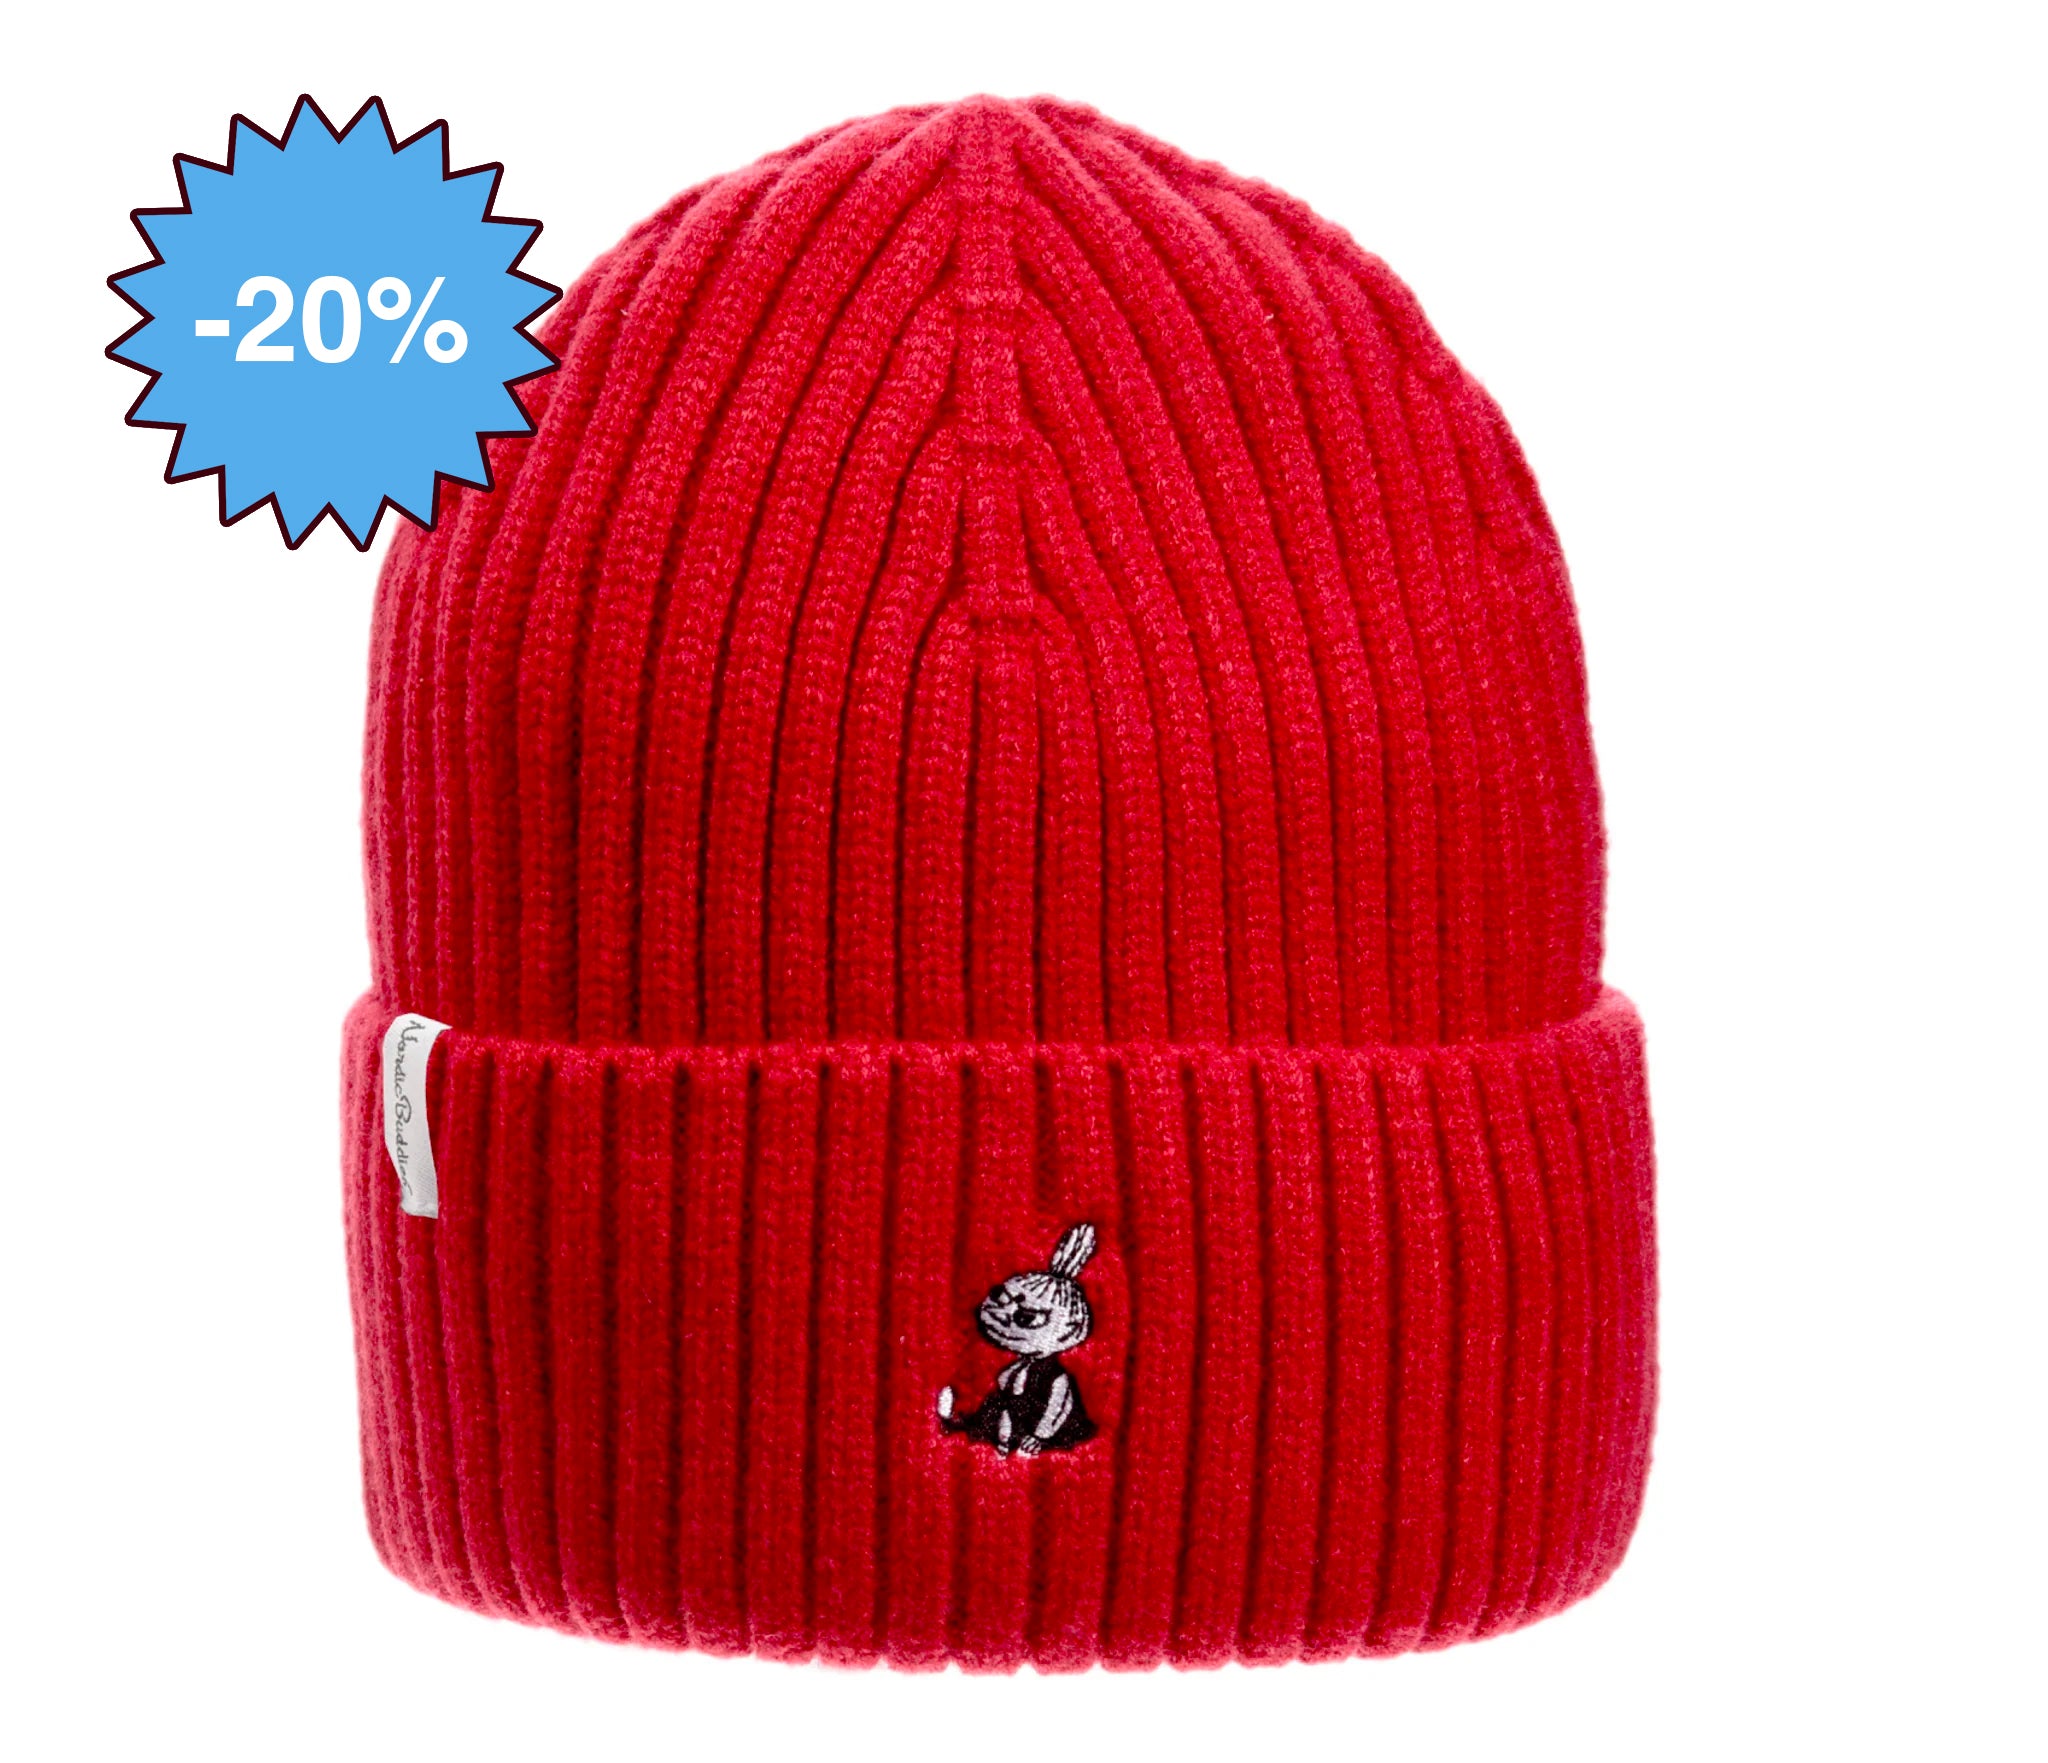 [Moomin] Little My Winter Embroidery Beanie Red